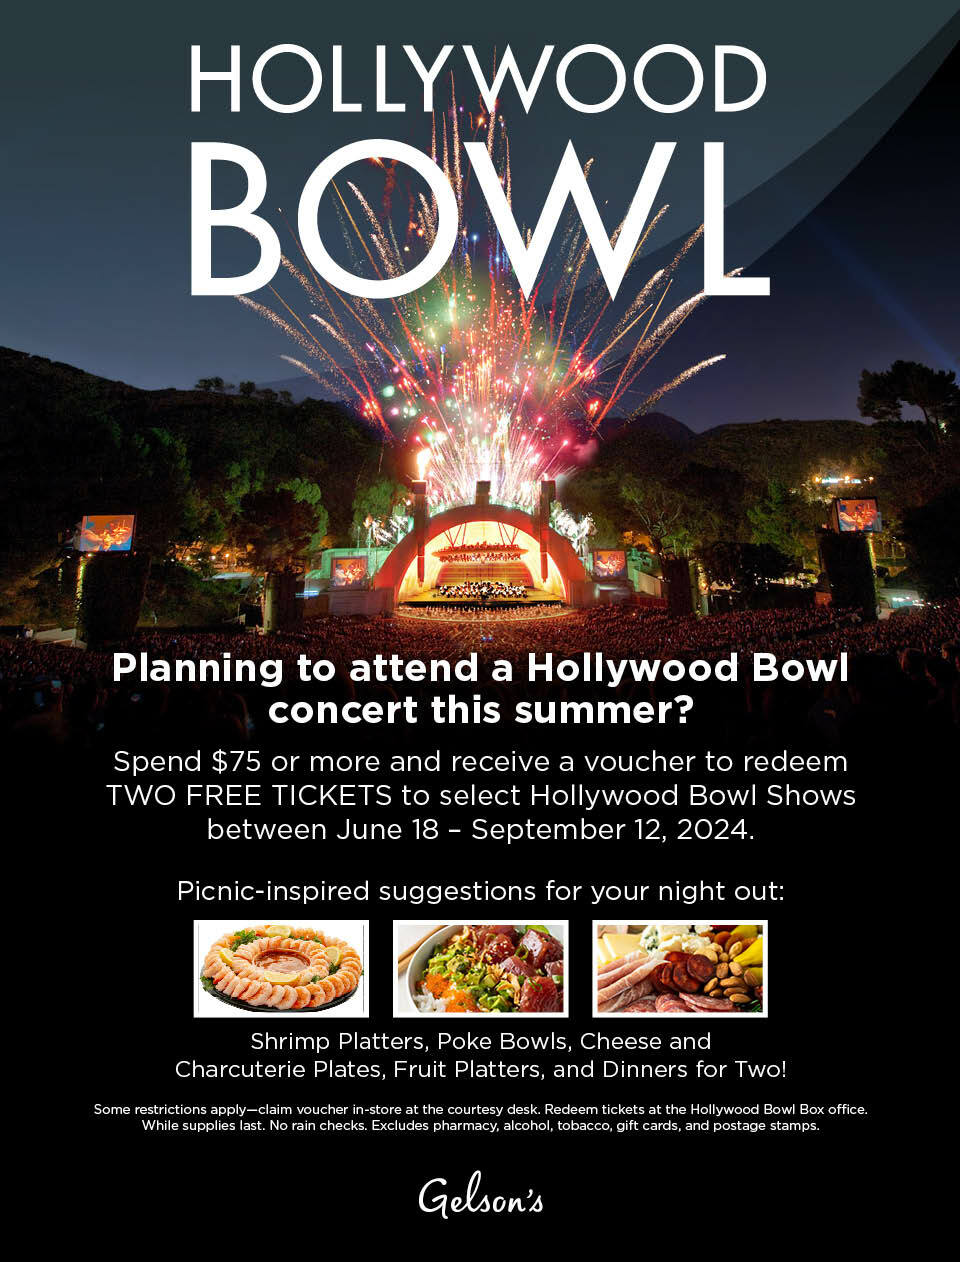 Hollywood Bowl Offer at Gelsons